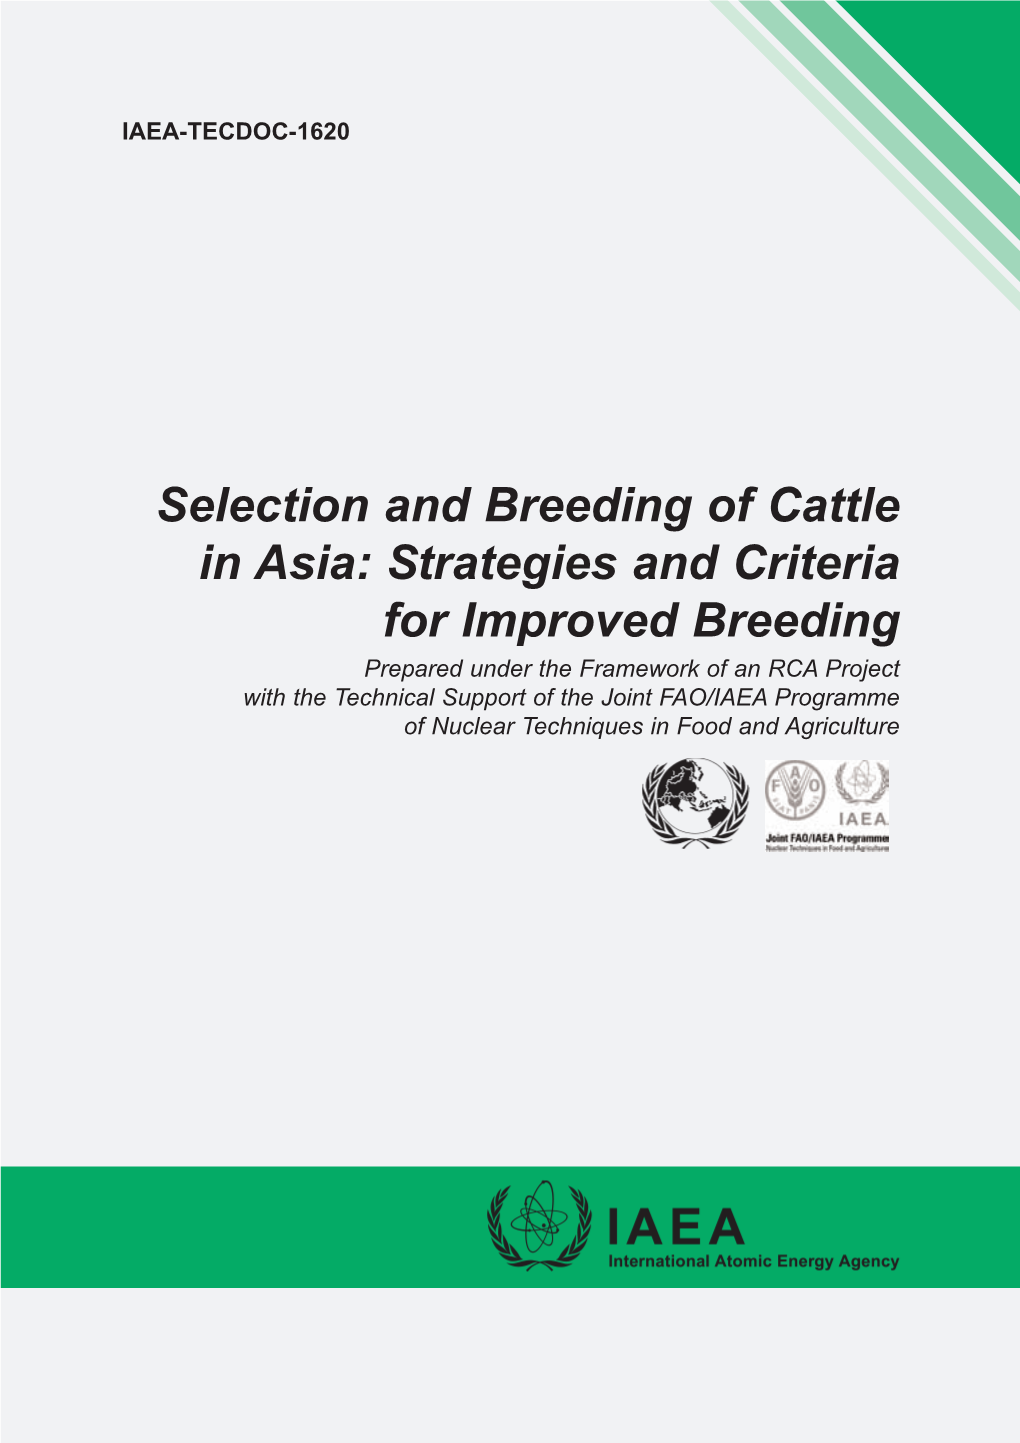 Selection and Breeding of Cattle in Asia: Strategies and Criteria For